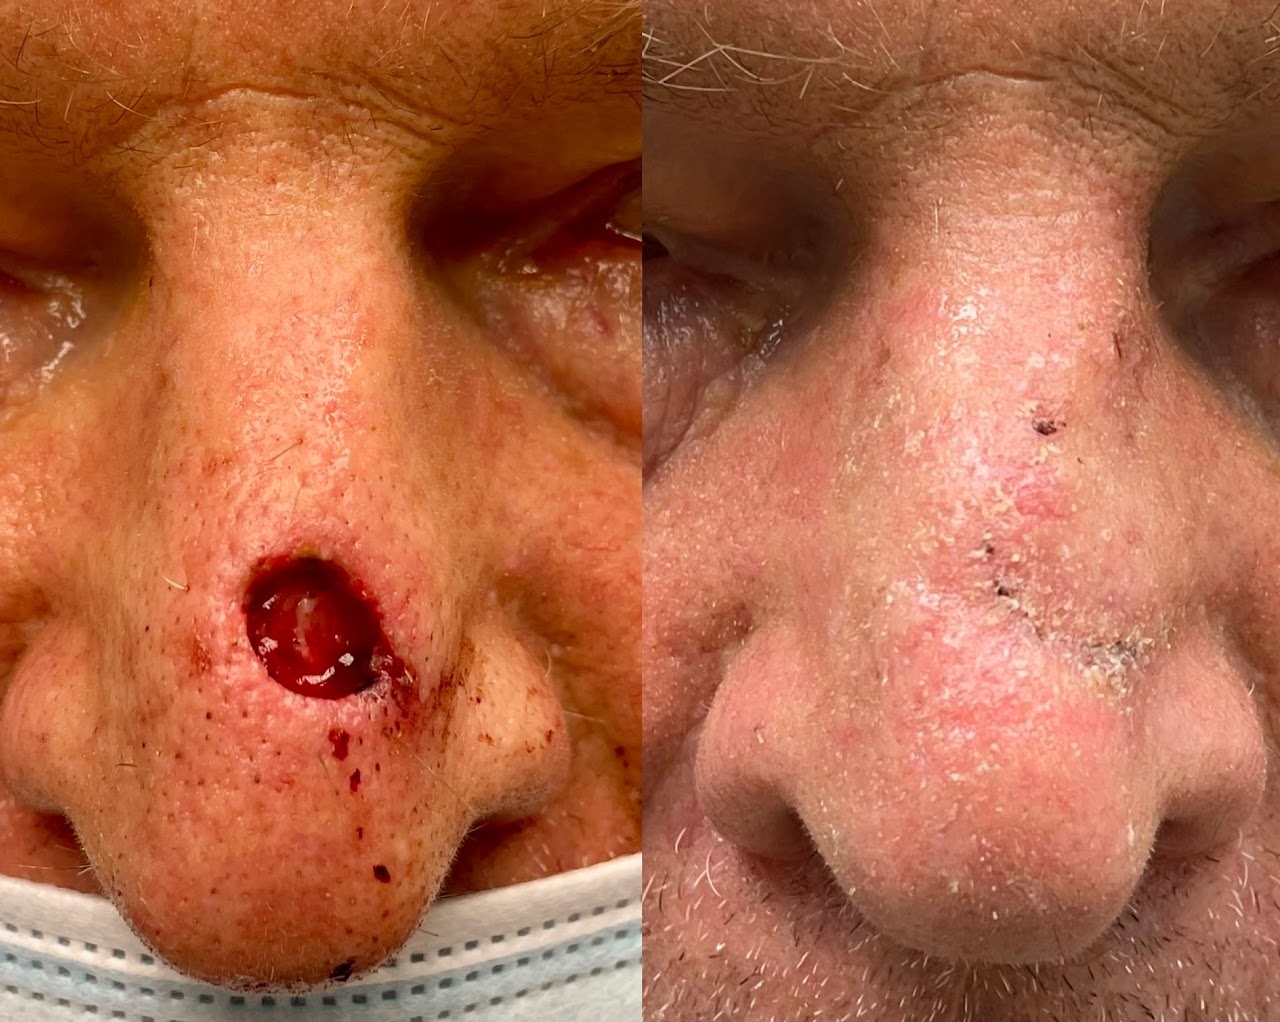 MOHS skin cancer surgery